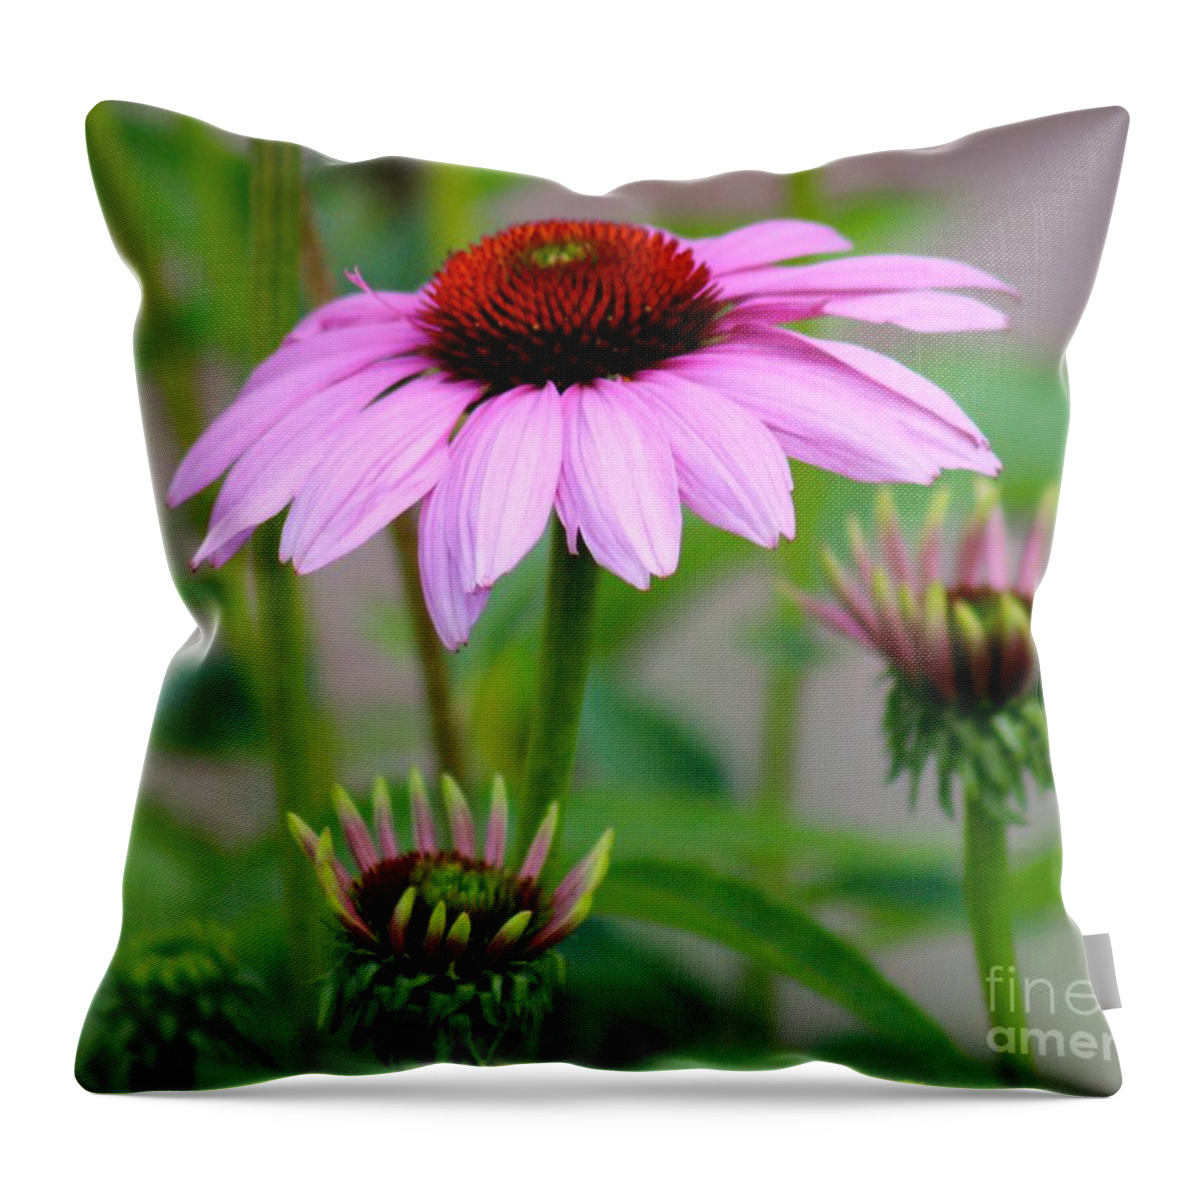 Pink Throw Pillow featuring the photograph Nature's Beauty 80 by Deena Withycombe